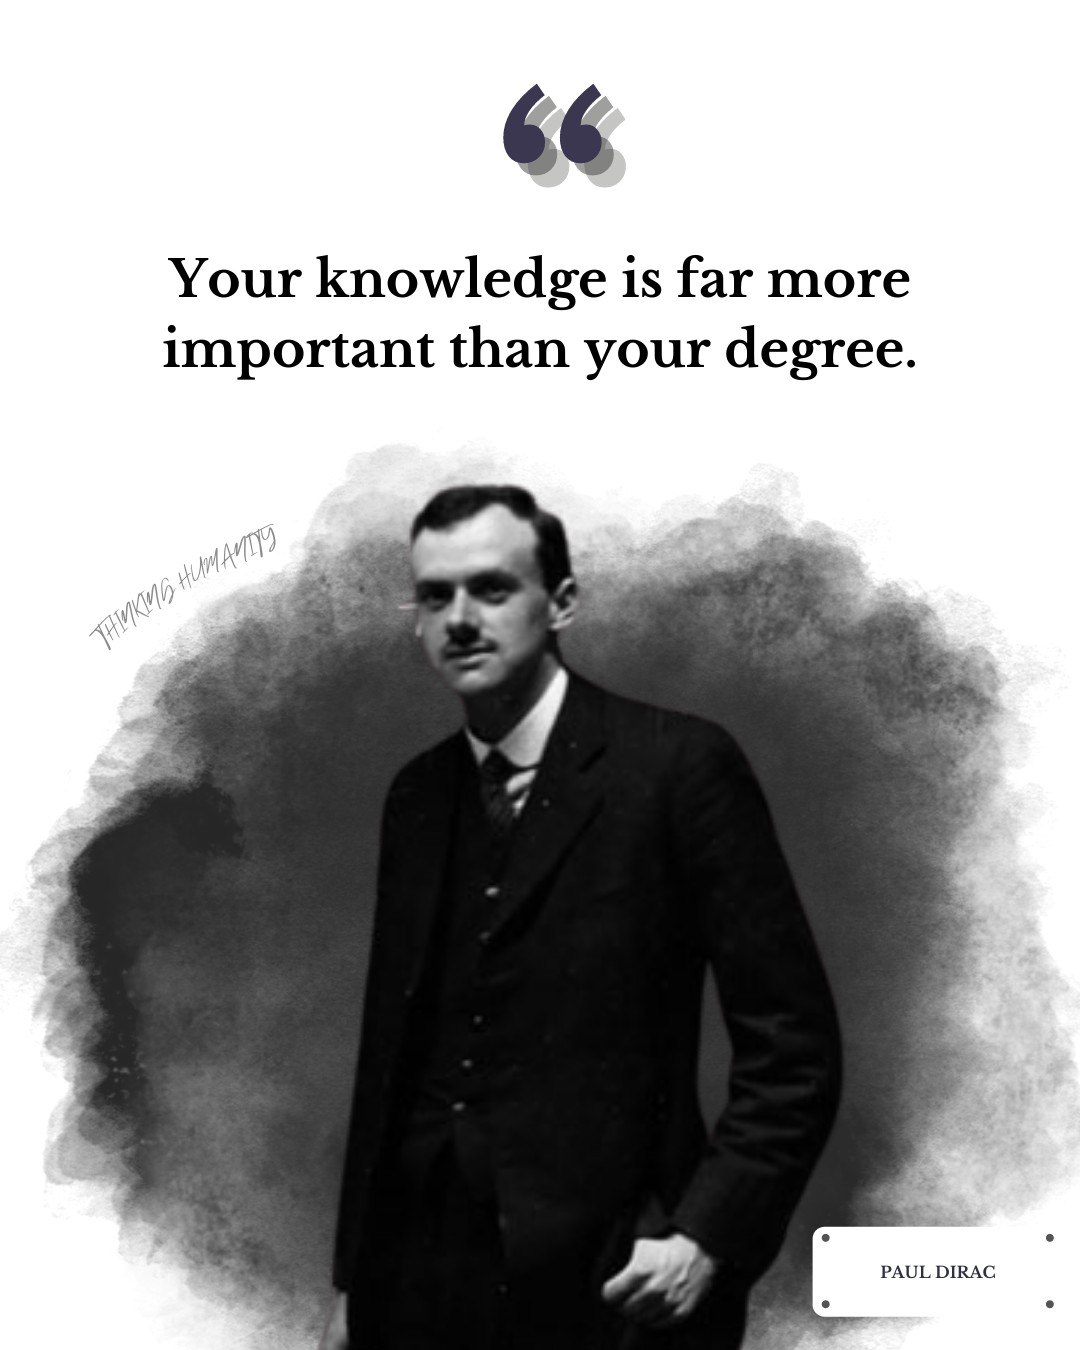 Your knowledge is far more important than your degree.